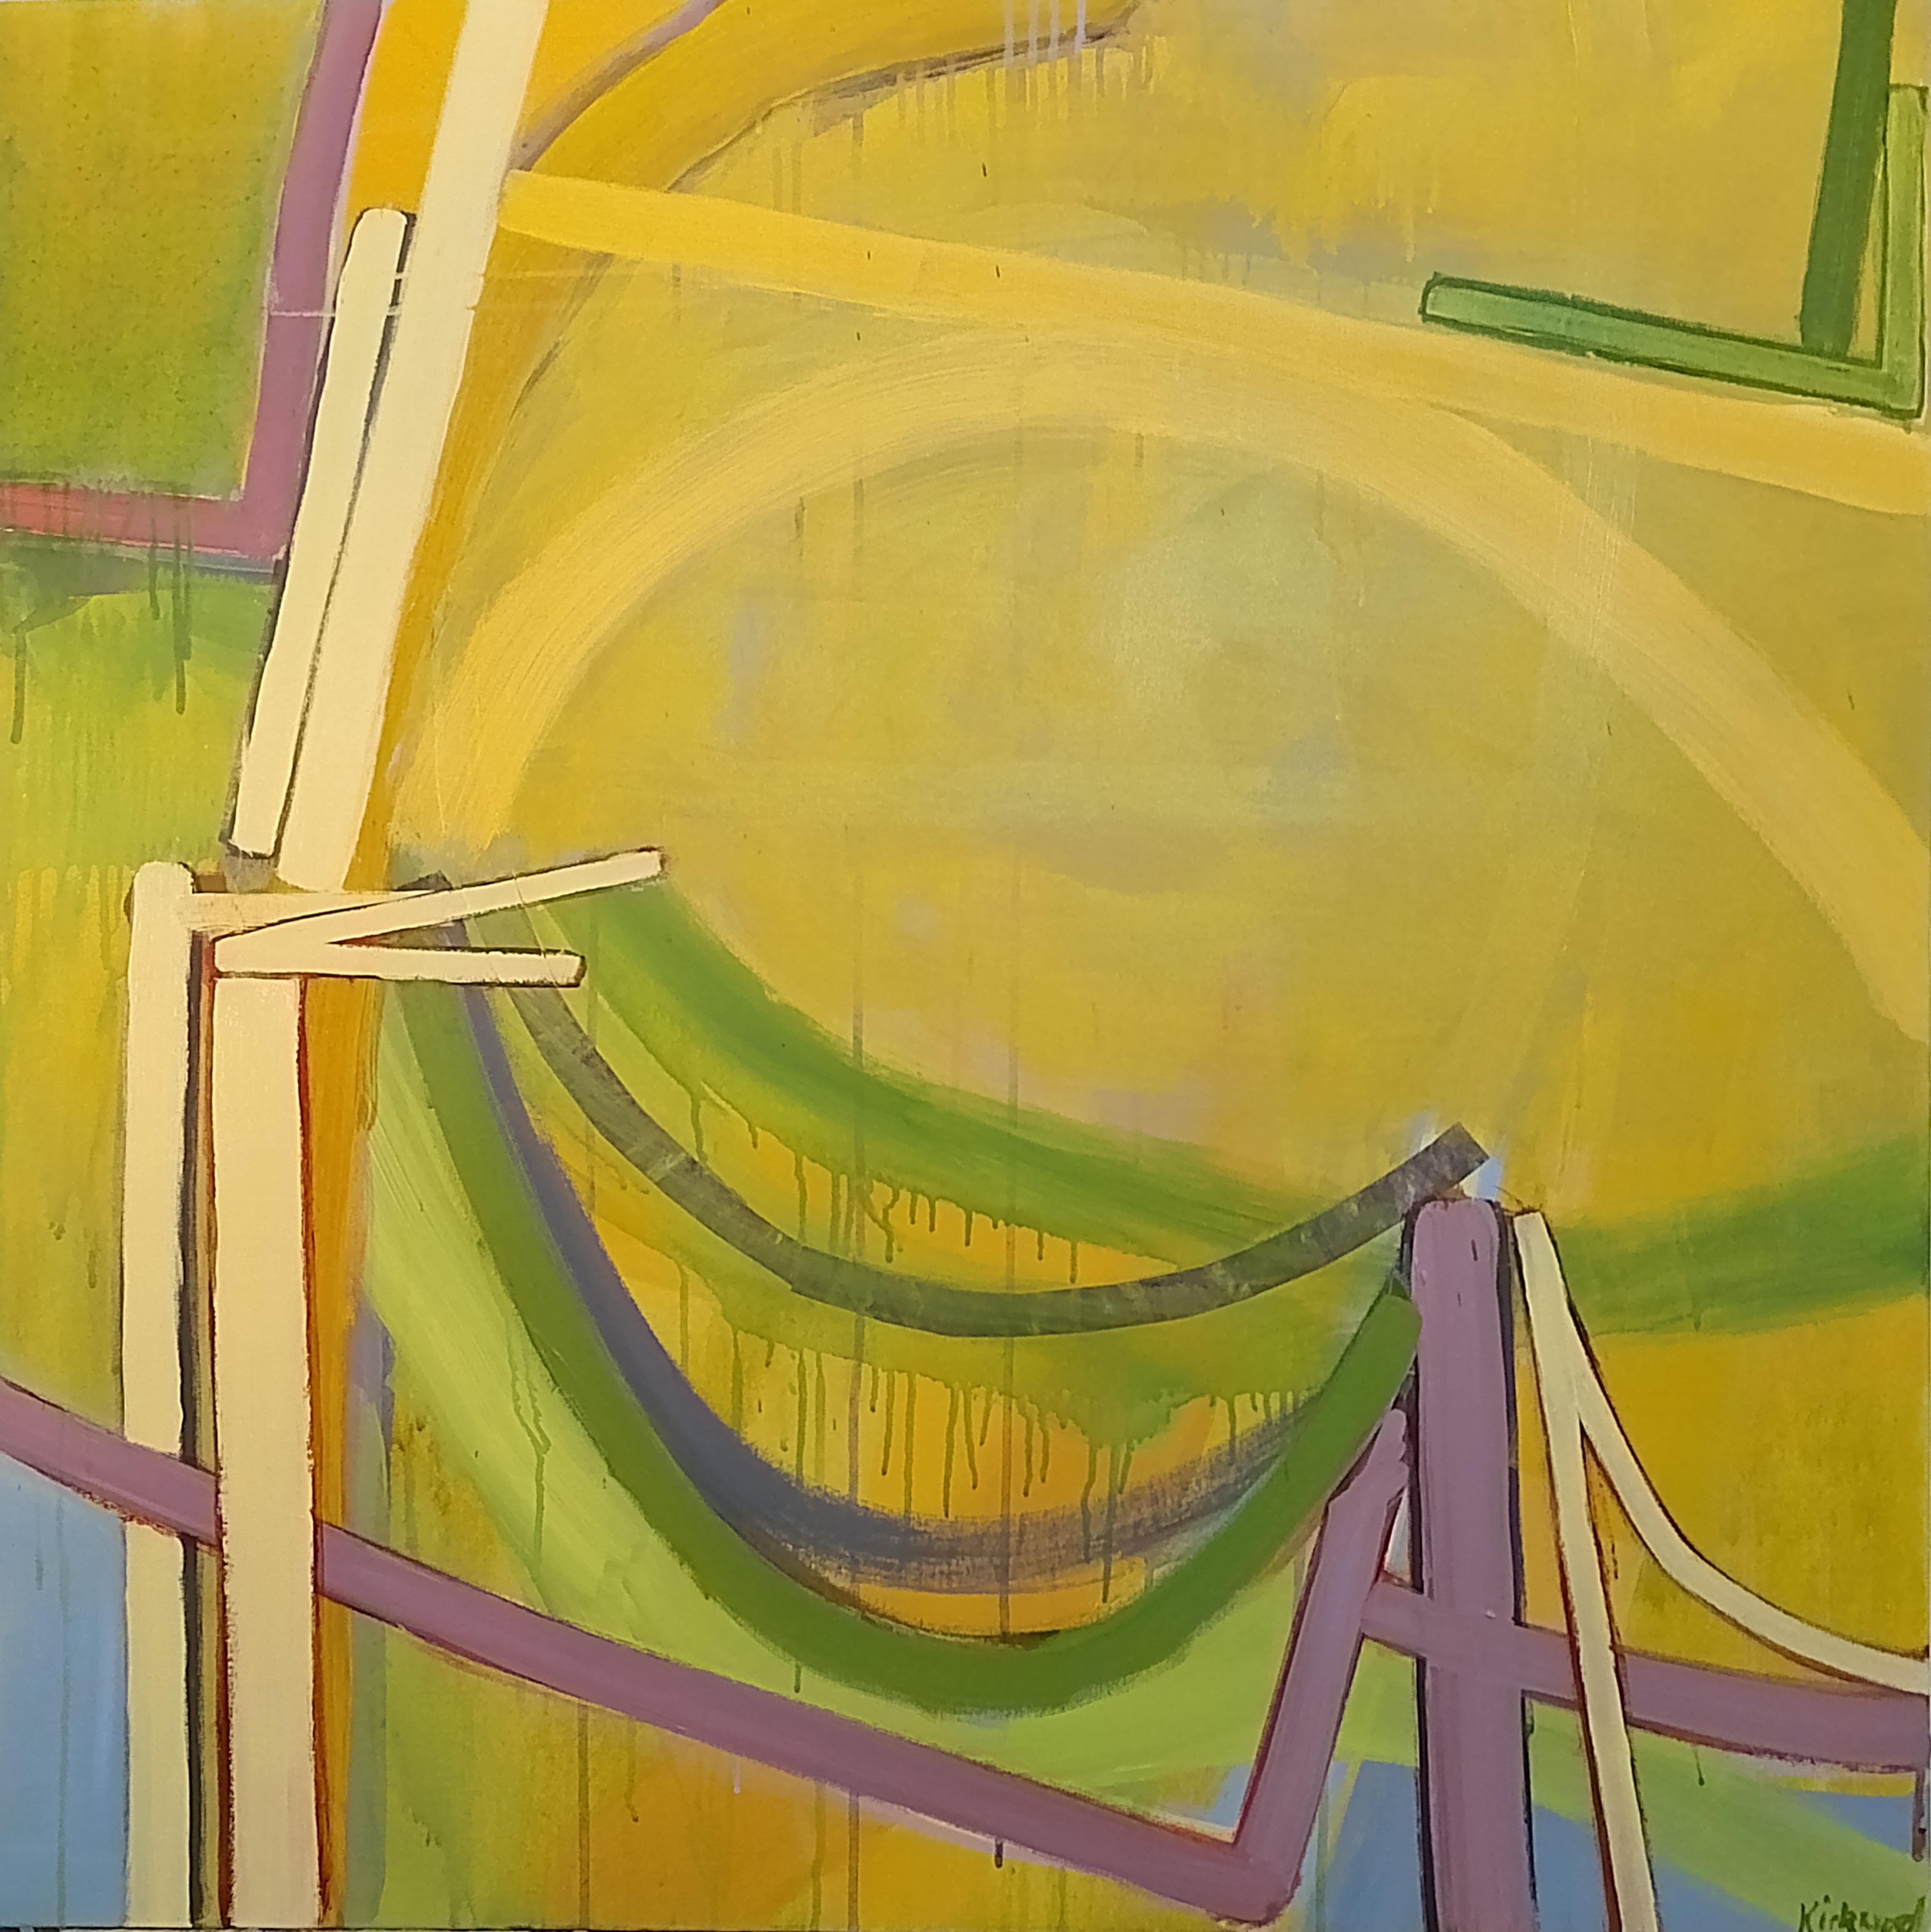 An abstract work of intersecting straight and curved lines in yellow, green and mauve on a yellow background with patches of blue at the edges.